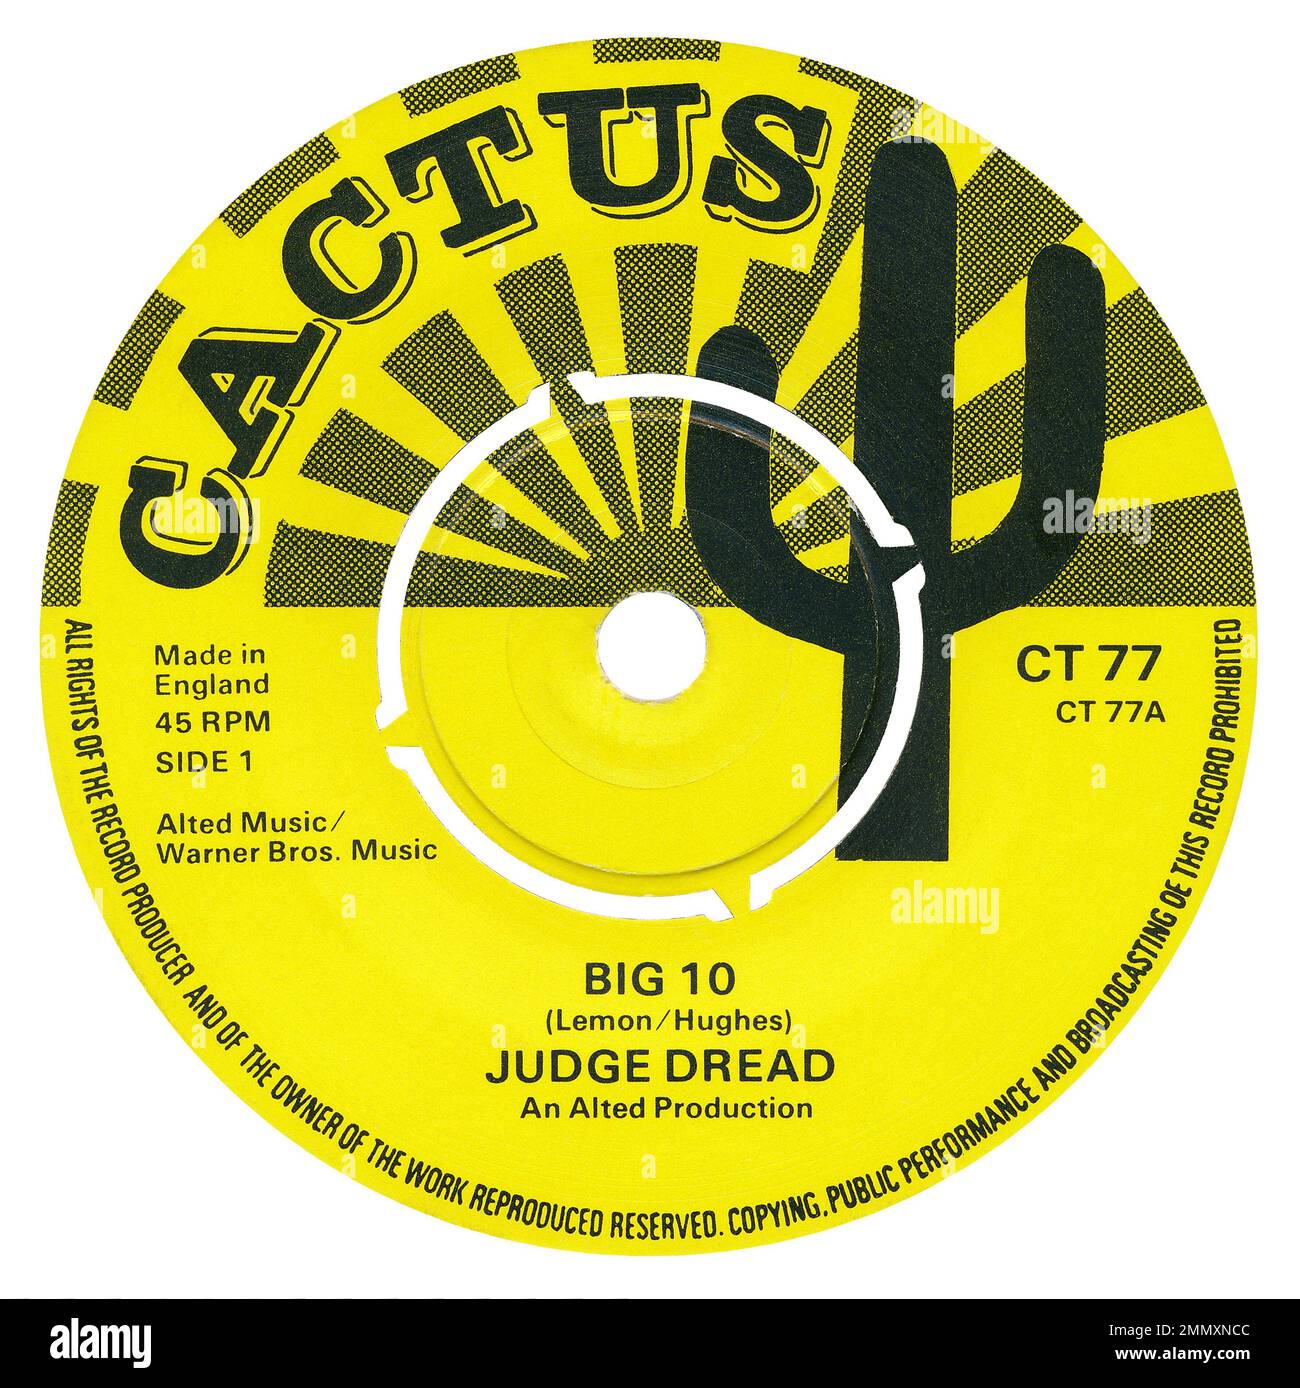 45 RPM 7" UK reggae record label of Big 10 by Judge Dread. Written by Lemon and Alexander Hughes (aka Judge Dread). Released in September 1975 on the Cactus label. Stock Photo